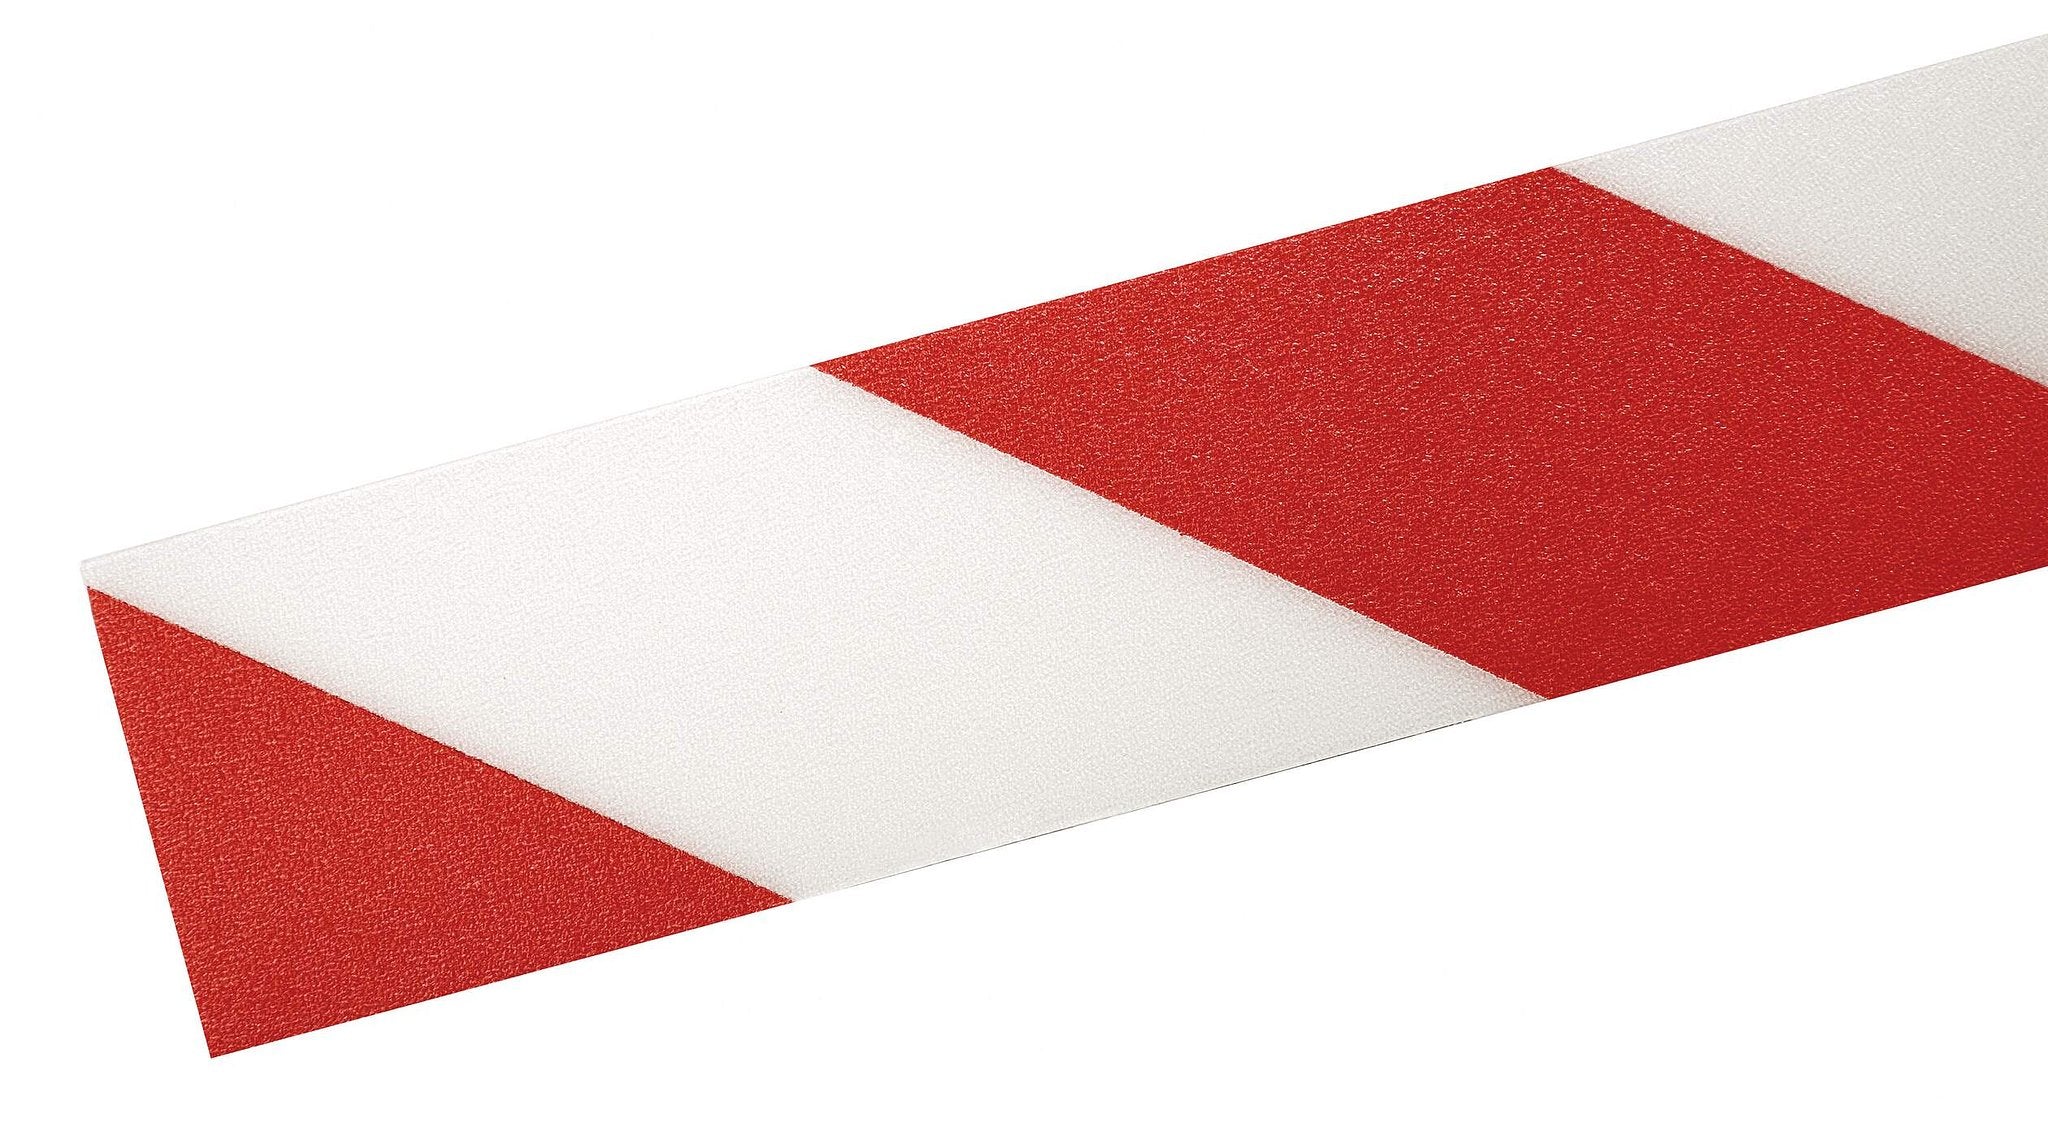 Durable DURALINE® vloer markering tape - 30 m - Rood/Wit